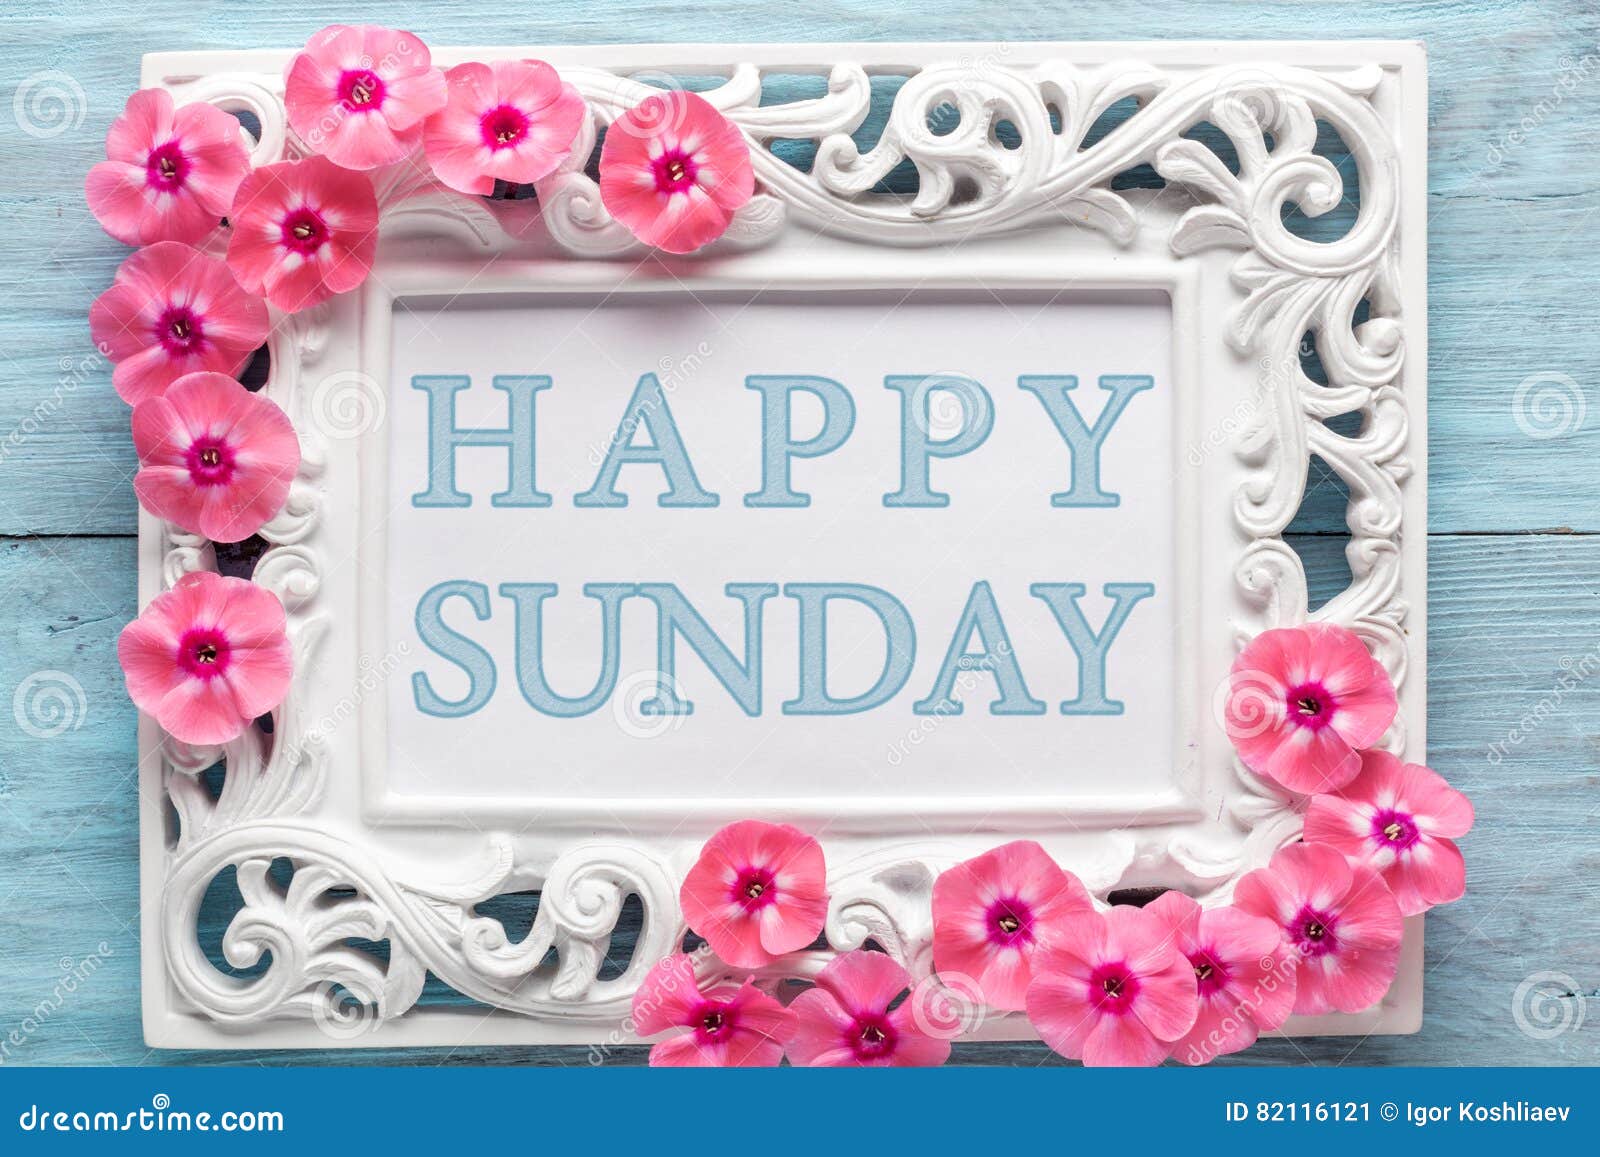 Frame with Flowers and Text: Happy Sunday Stock Image - Image of ...